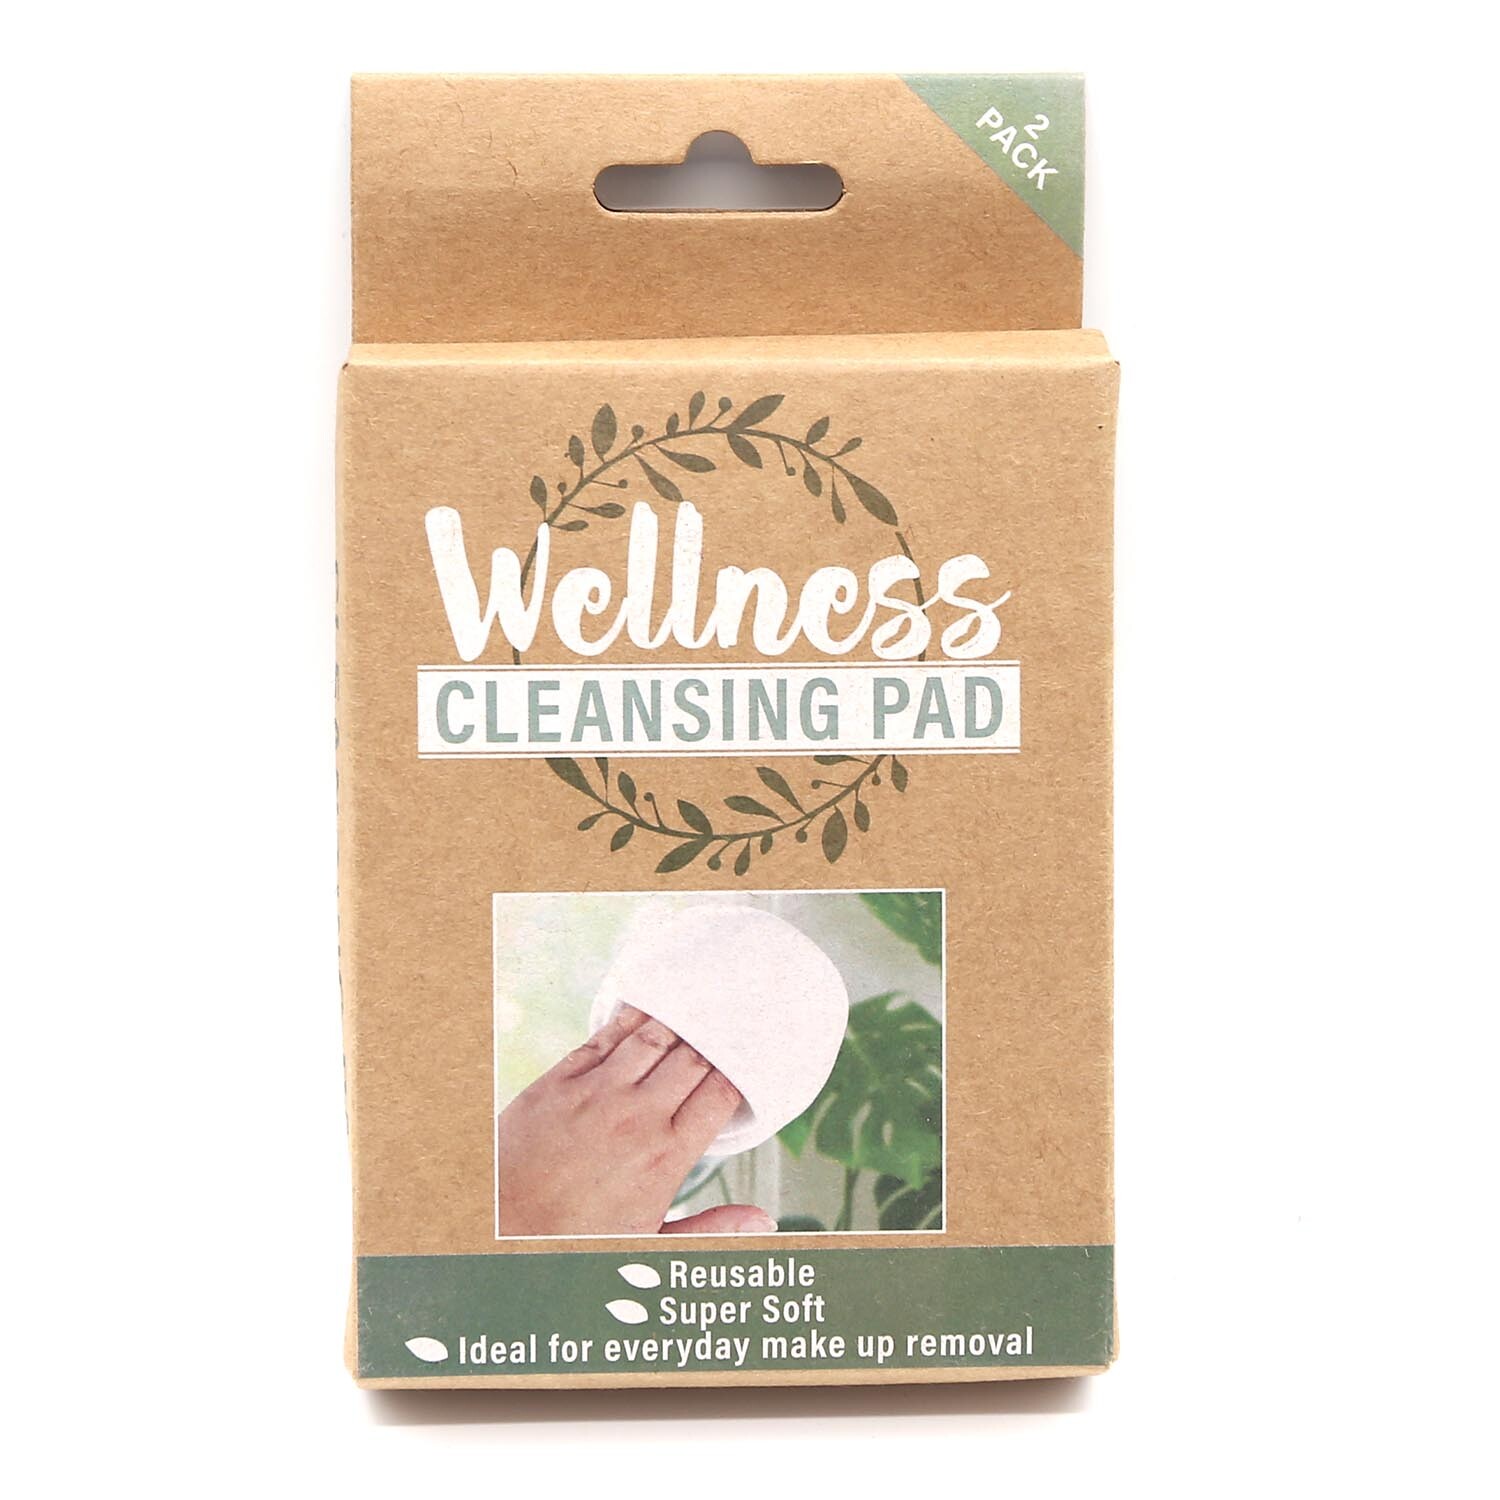 Pack of 2 Wellness Cleansing Pads - White Image